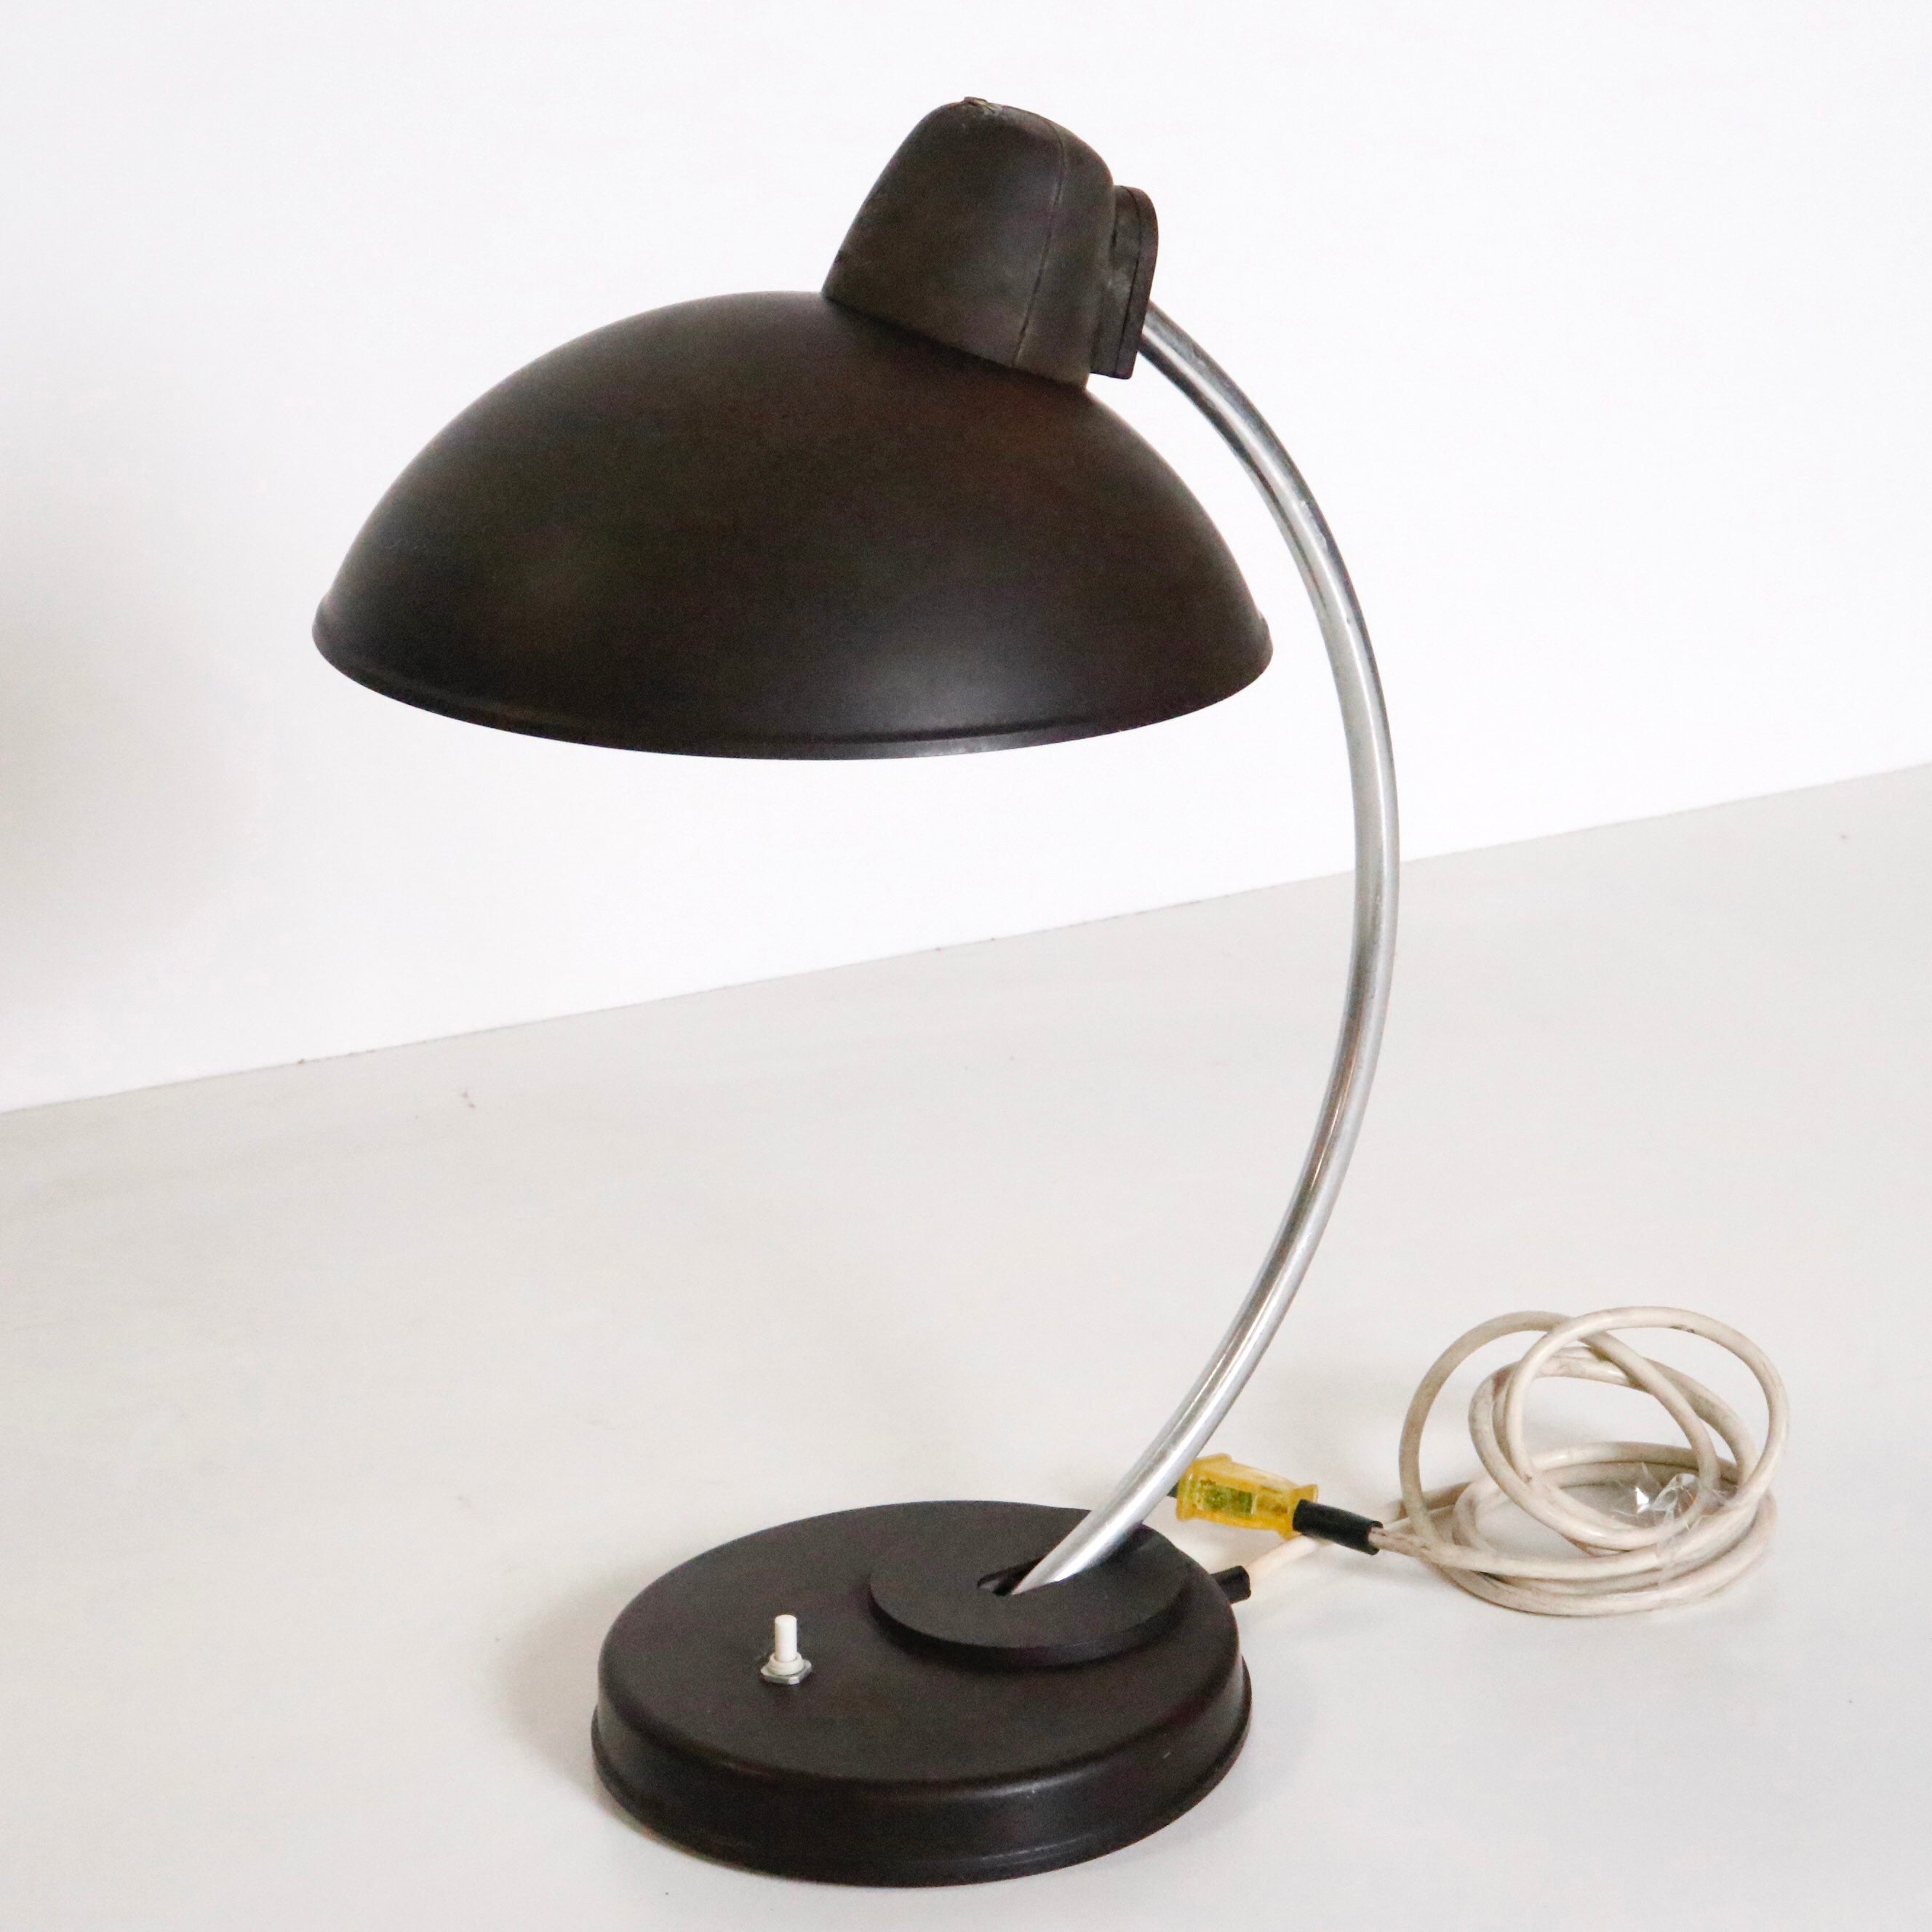 An all original brown desk lamp designed by Marianne Brandt and Hin Bredendieck for LBL, a German lamp company notable for producing Bauhaus period lighting. 

Model 0342.

Germany, circa 1930-1940. 

Signed on shade.

A dark brown adjustable shade